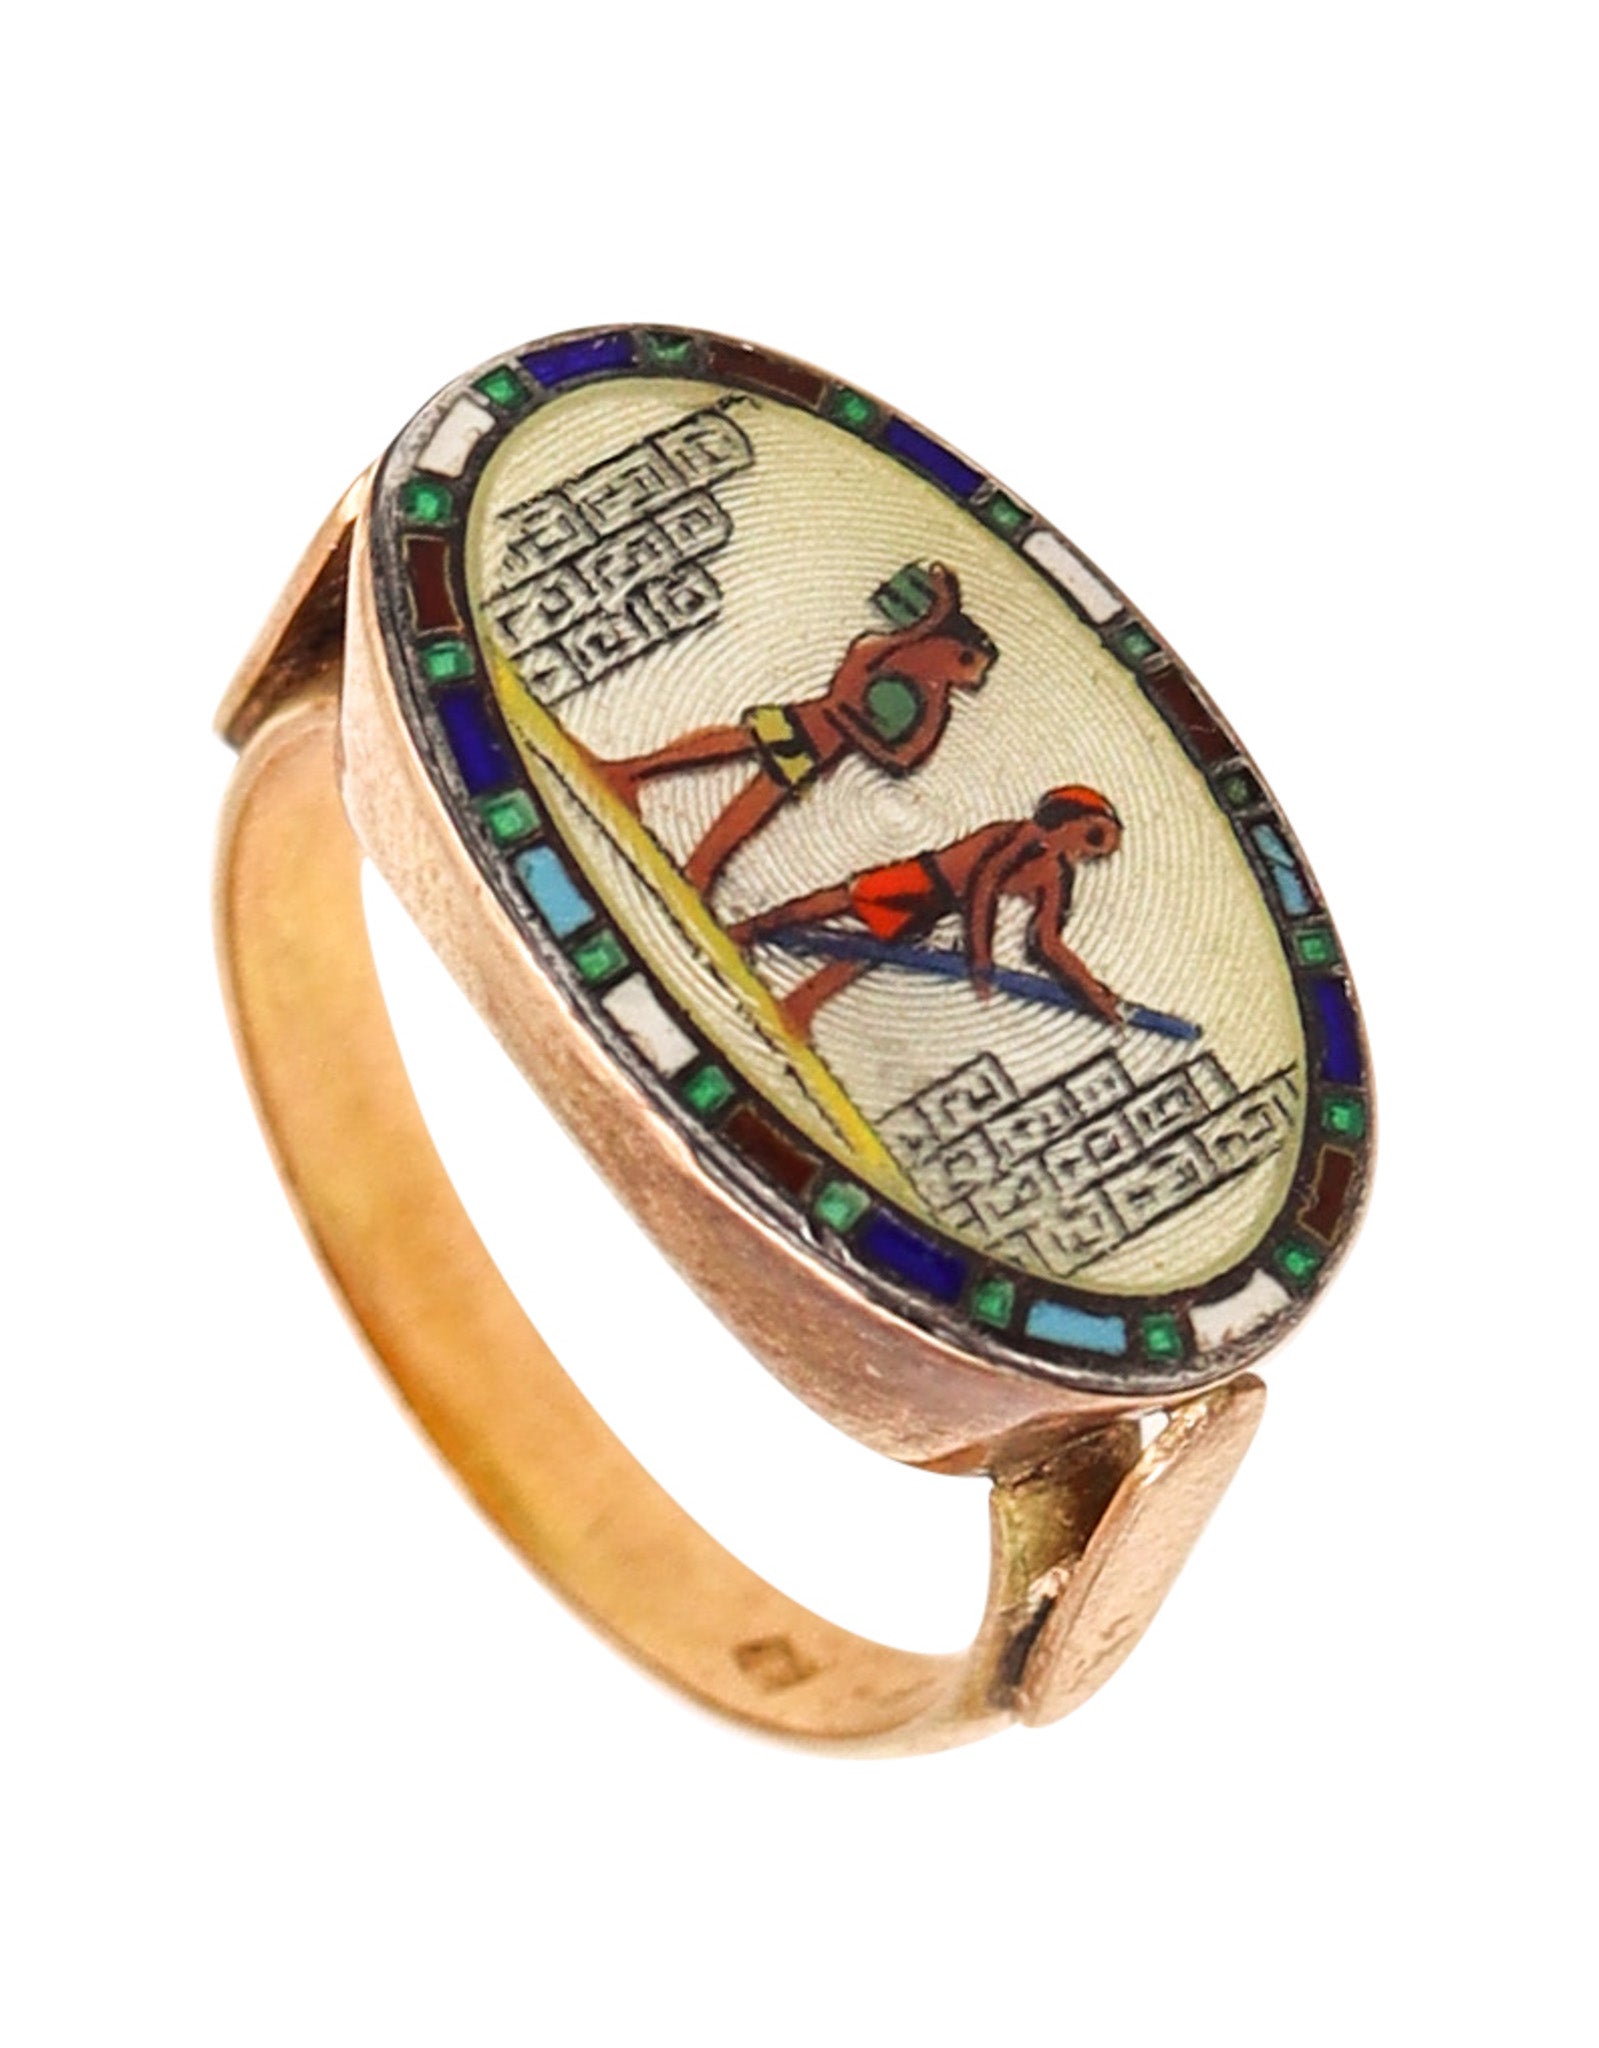 -Austrian 1920 Deco Egyptian Revival Ring In 14Kt Yellow Gold With Guilloche Enamel